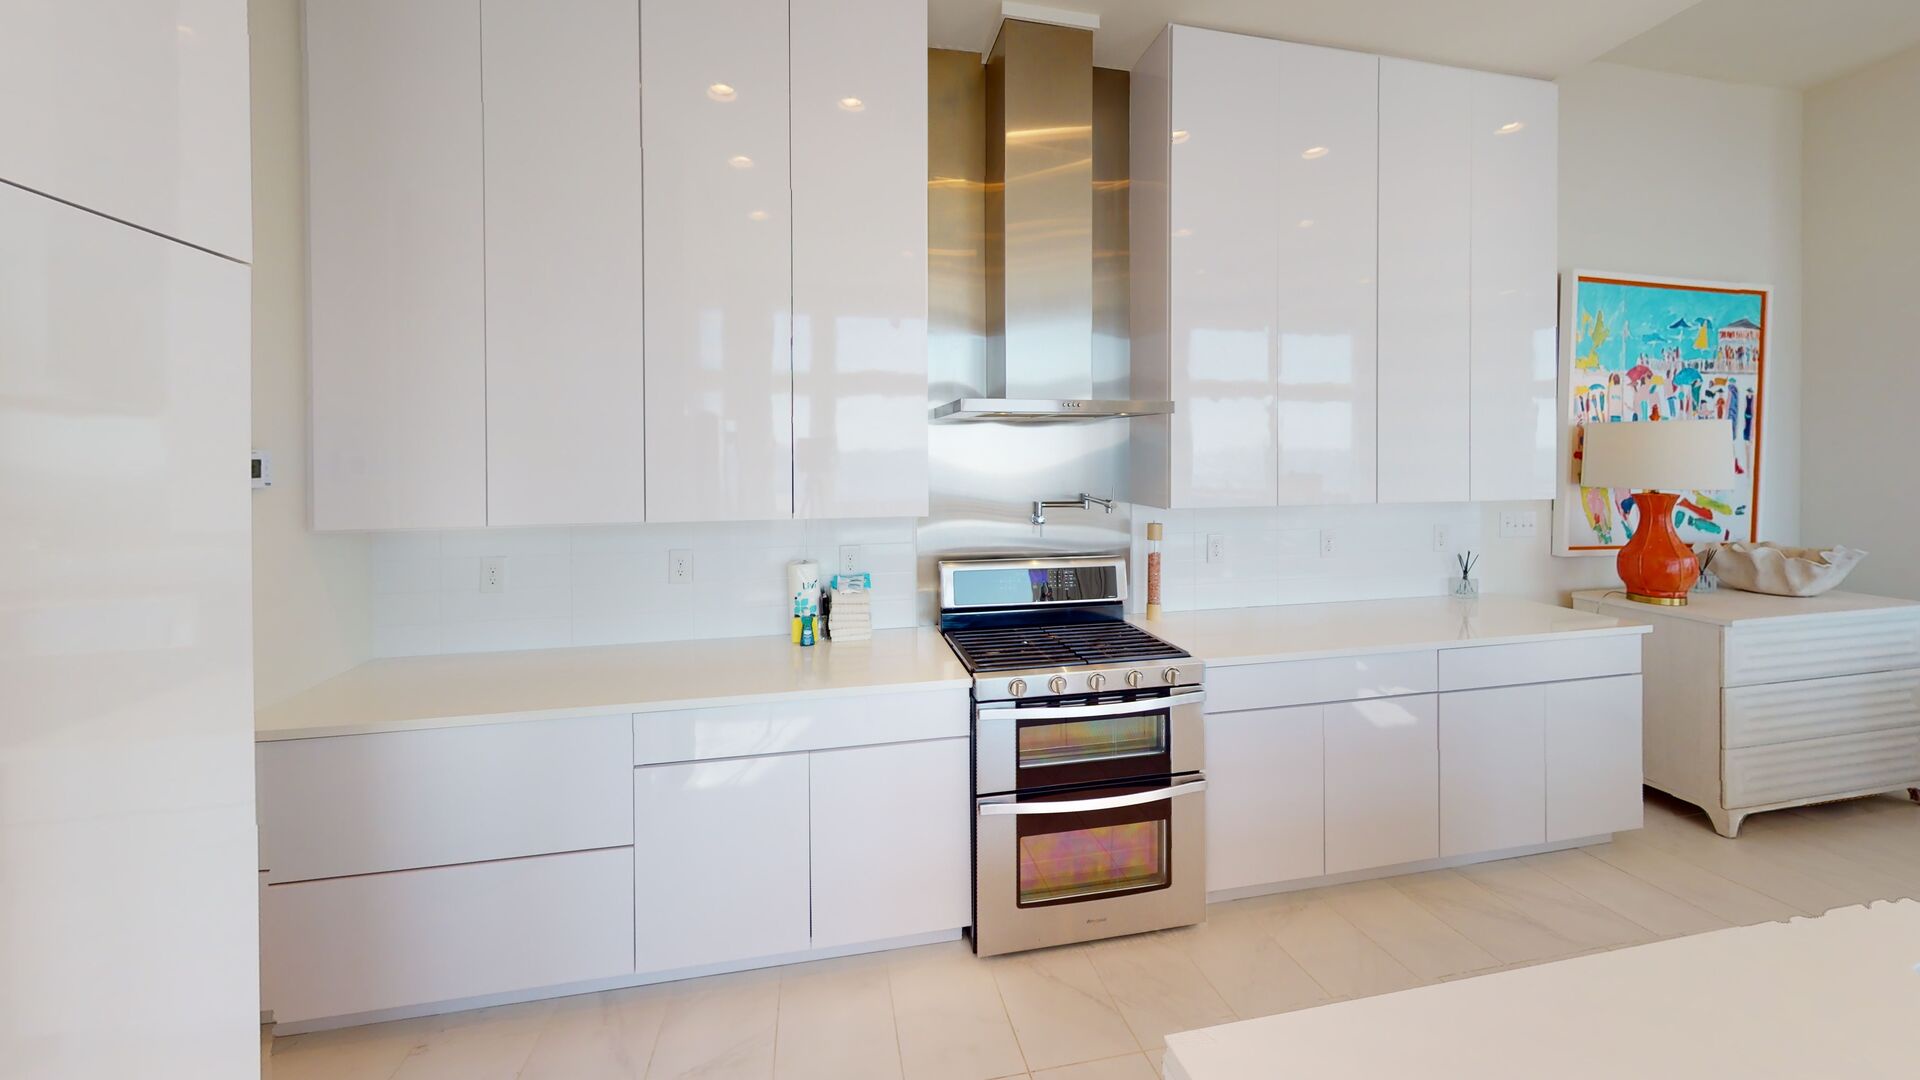 A modern, upscale, fully equipped kitchen